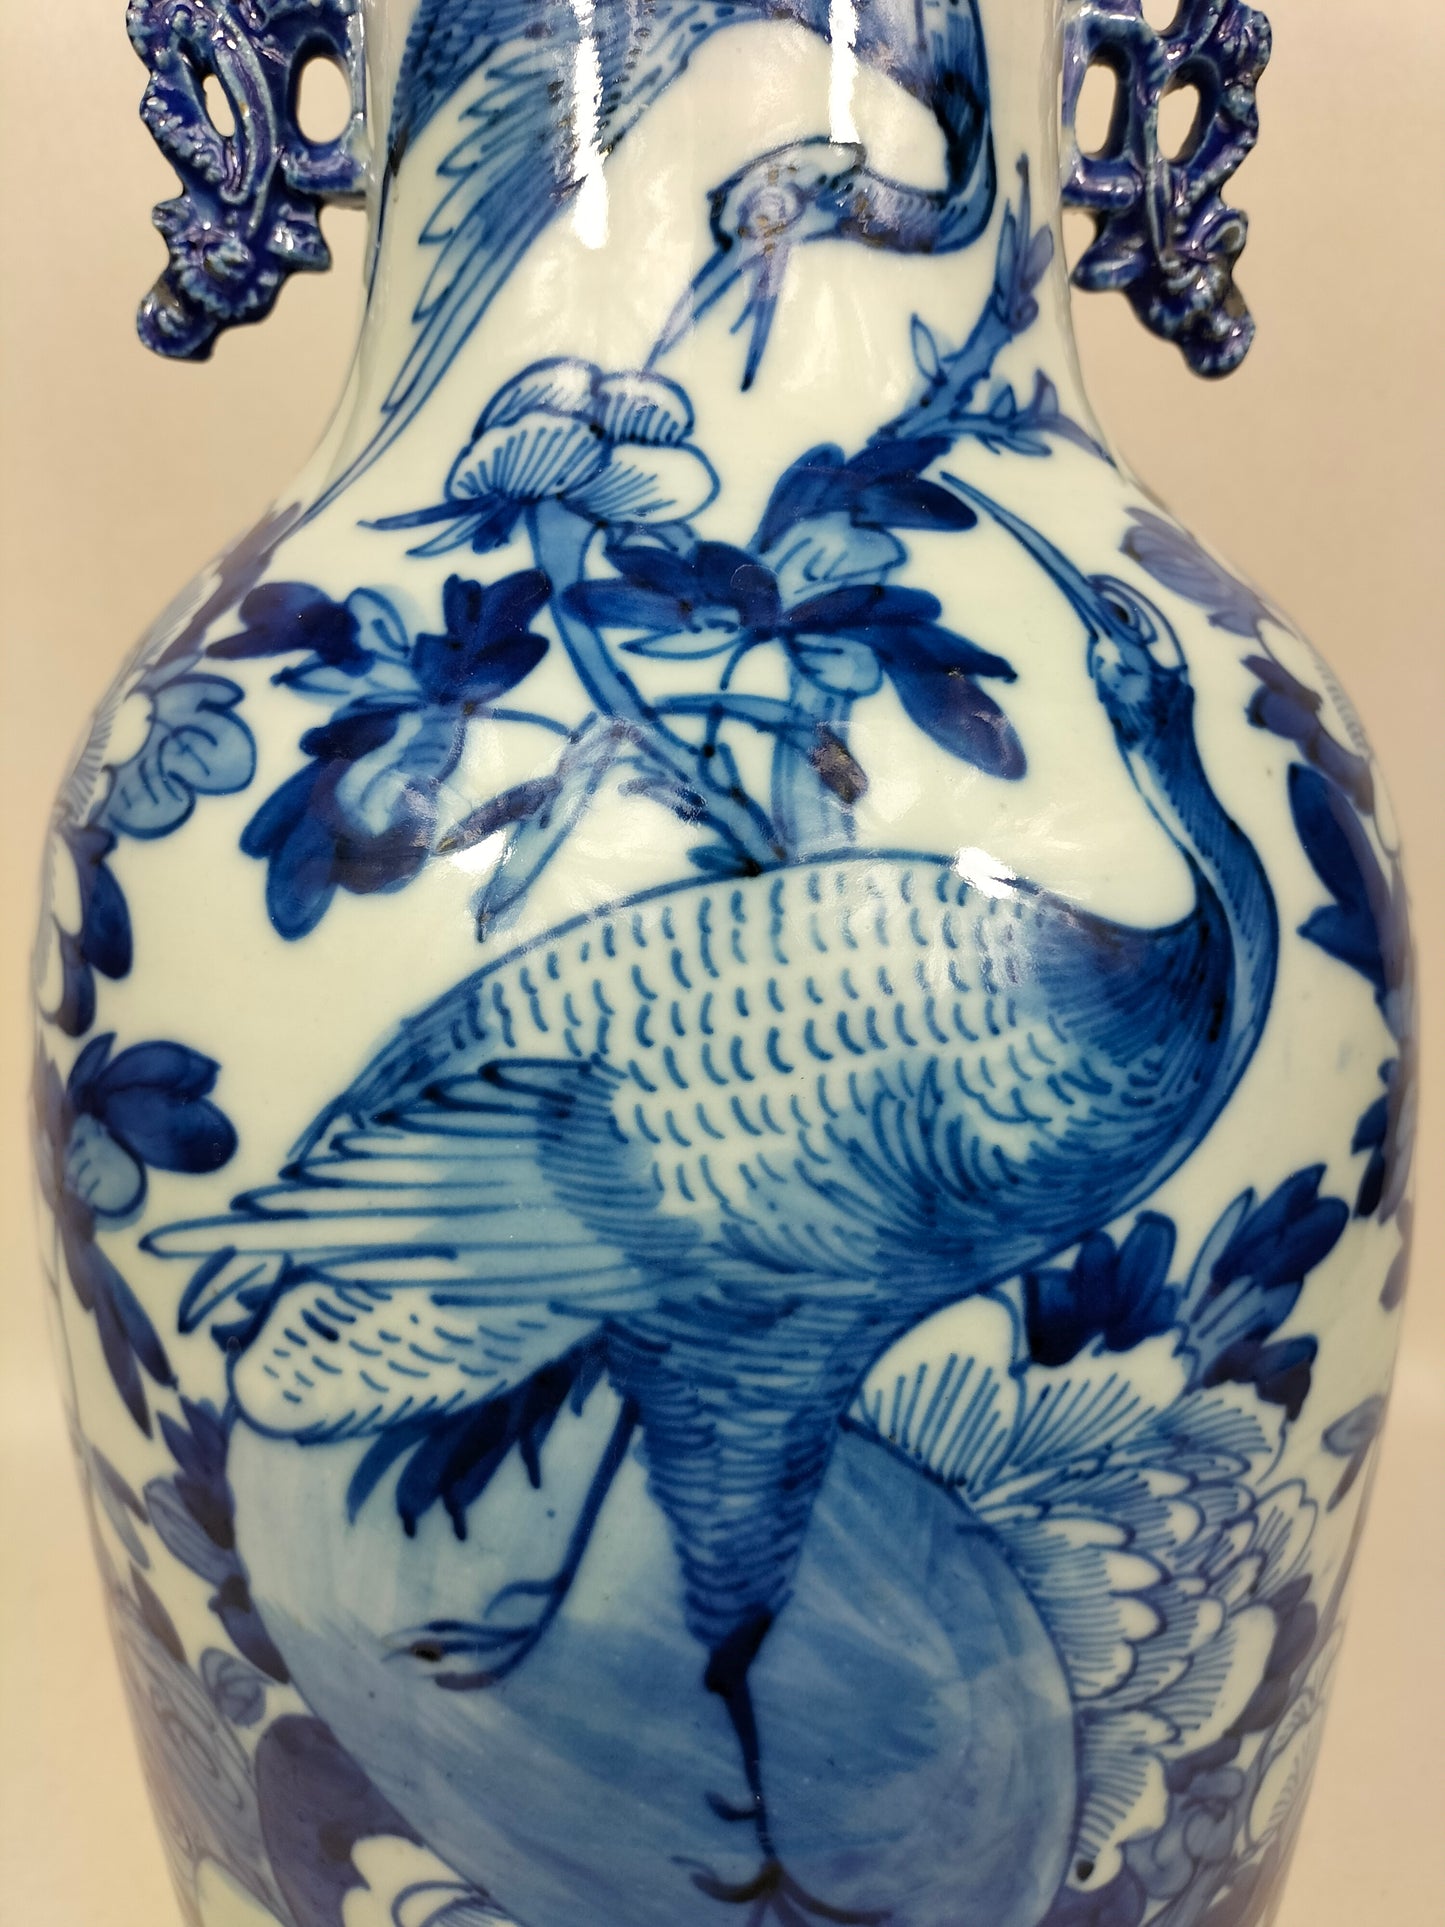 Large antique Chinese vase with cranes and flowers // Blue and white - Qing Dynasty - 19th century